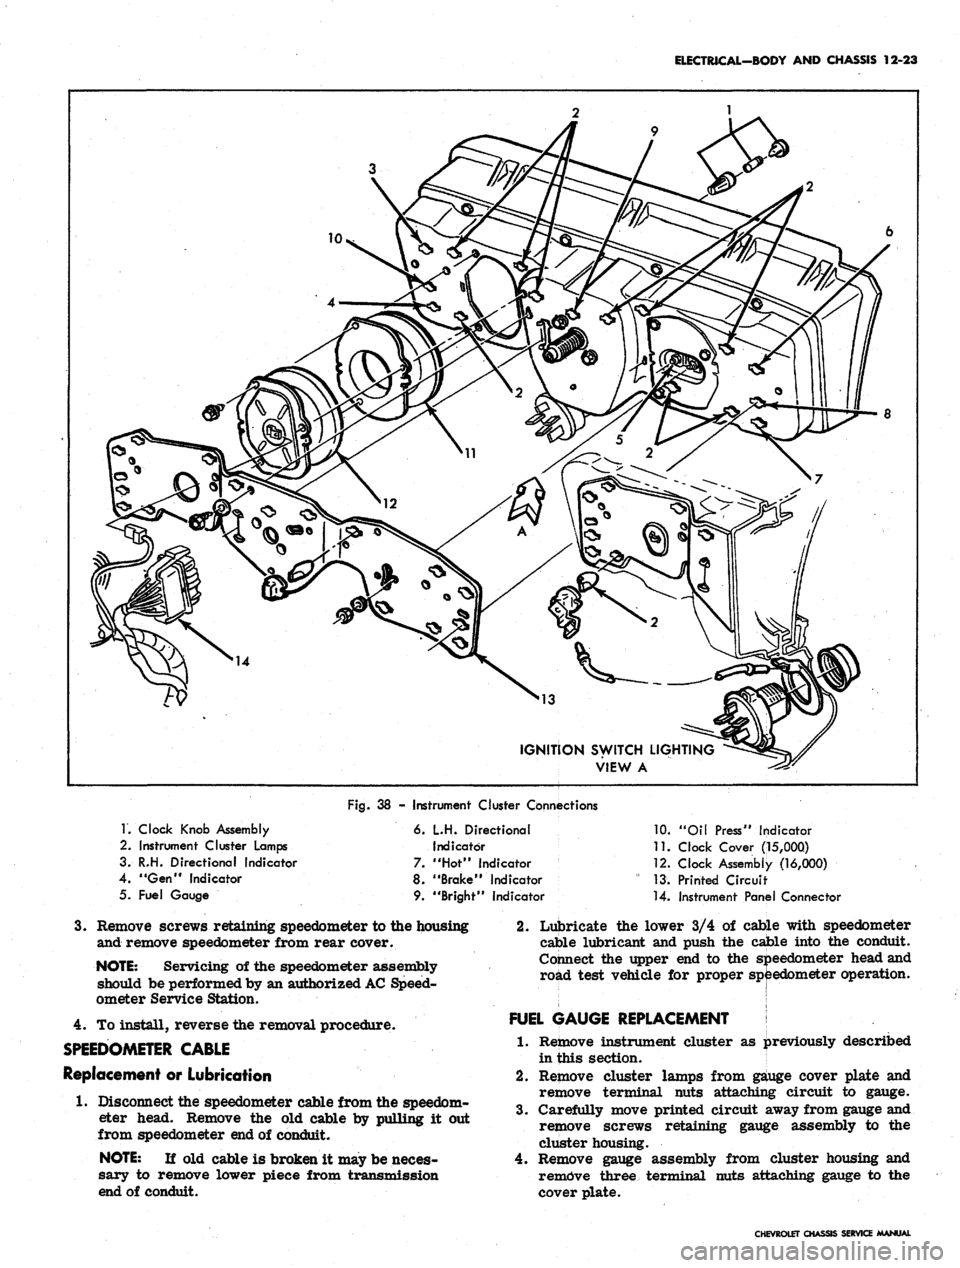 CHEVROLET CAMARO 1967 1.G Chassis Workshop Manual 
ELECTRICAL-BODY AND CHASSIS 12-23

IGNITION SWITCH LIGHTING

VIEW A

1.
 Clock Knob Assembly

2.
 Instrument Cluster Lamps

3. R.H. Directional Indicator

4.
 "Gen*
 Indicator

5. Fuel Gauge 
Fig.
 